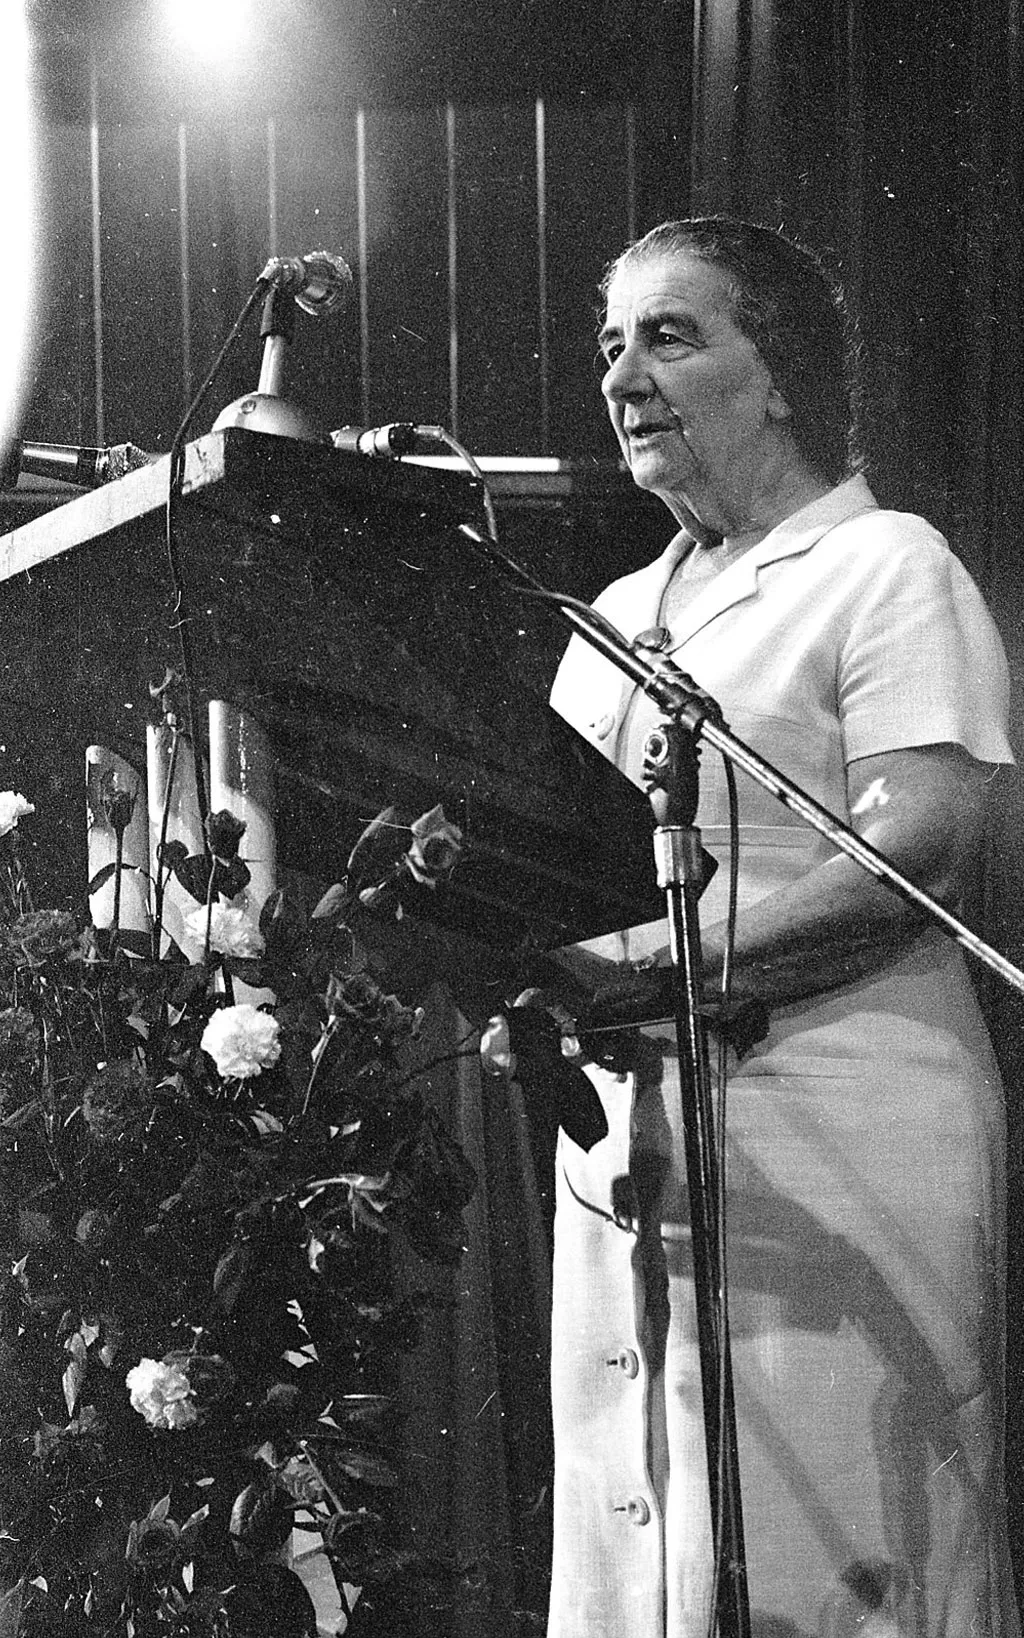 Meir speaking at a podium in 1969